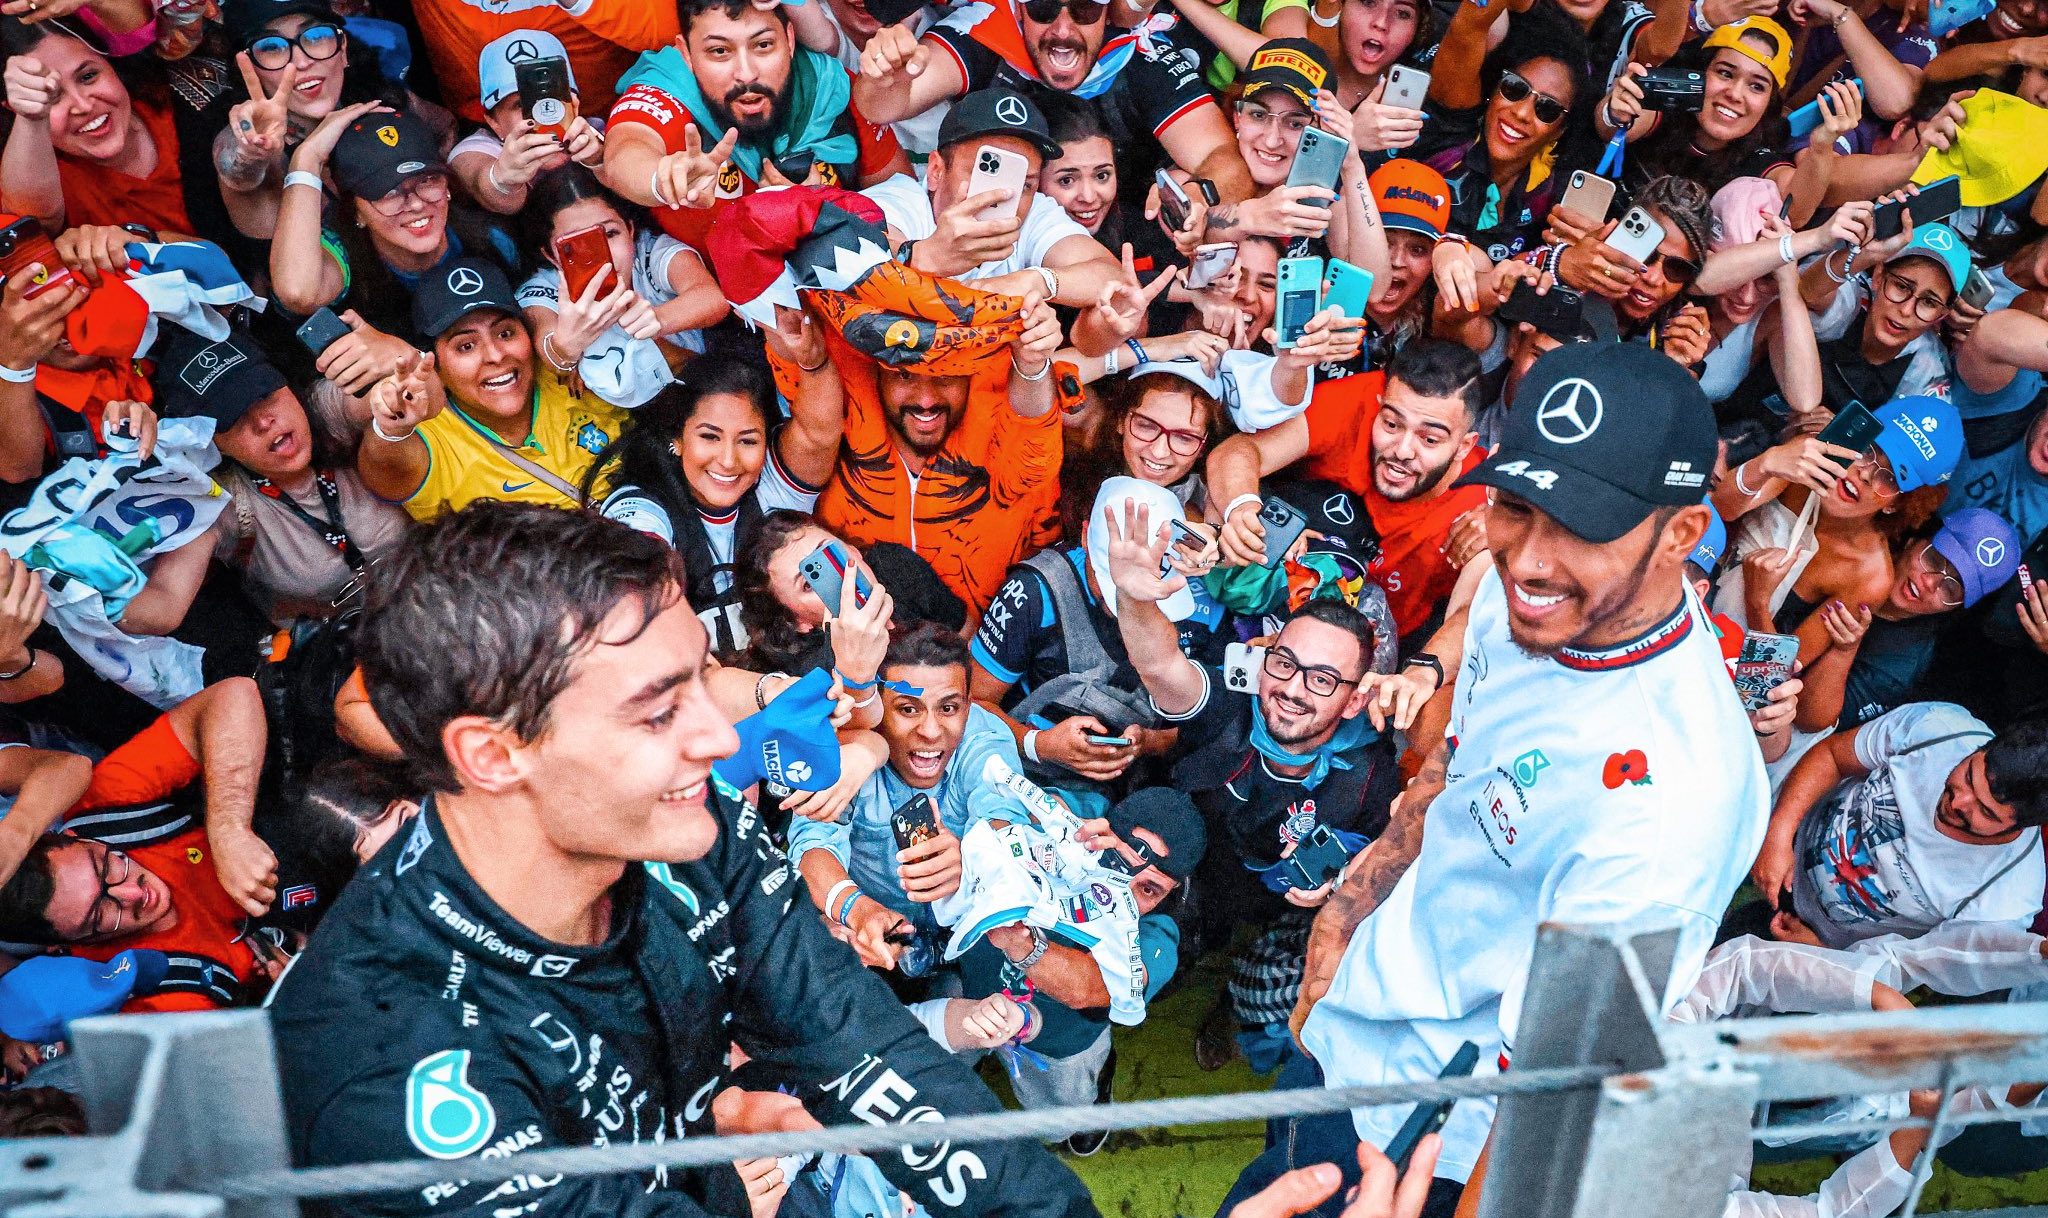 George Russell and Lewis Hamilton celebrate with fans in Brazil after finishing 1-2 at Sao Paulo